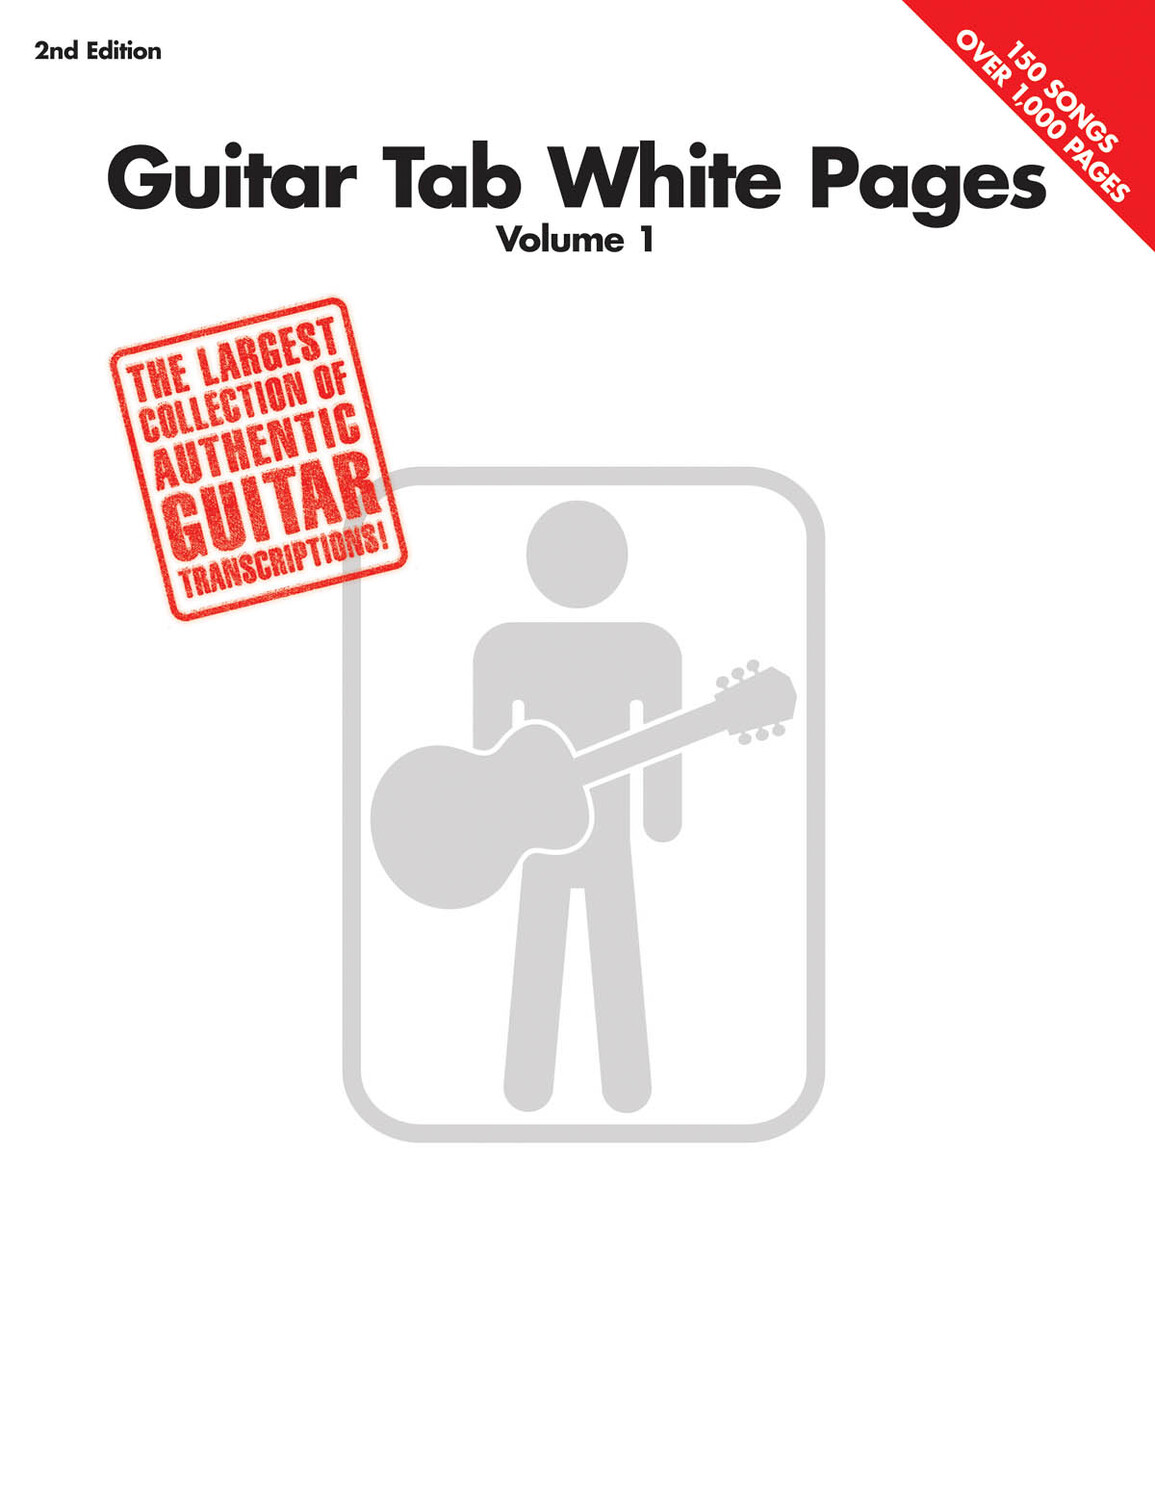 Cover: 73999904710 | Guitar Tab White Pages - Volume 1 - 2nd Edition | Hal Leonard